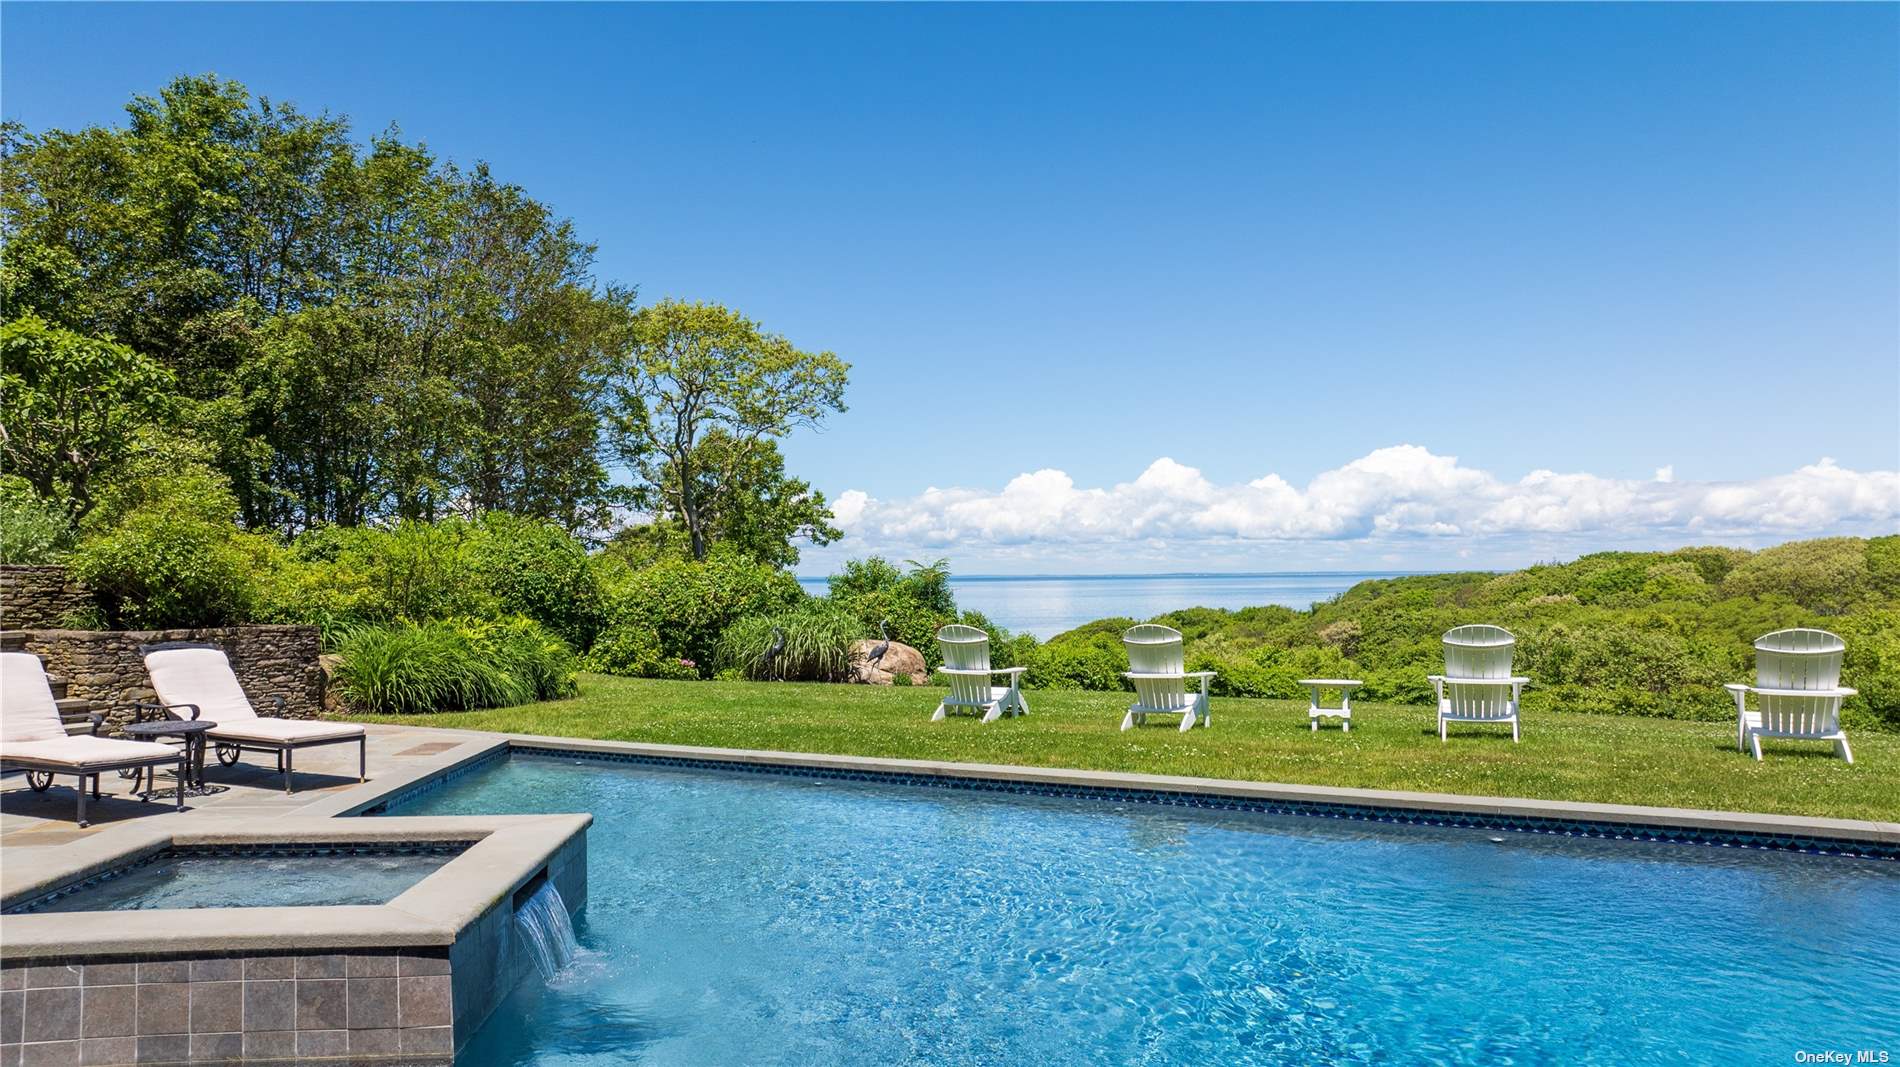 Property for Sale at 30 Wills Point Road, Montauk, Hamptons, NY - Bedrooms: 5 
Bathrooms: 8  - $10,750,000